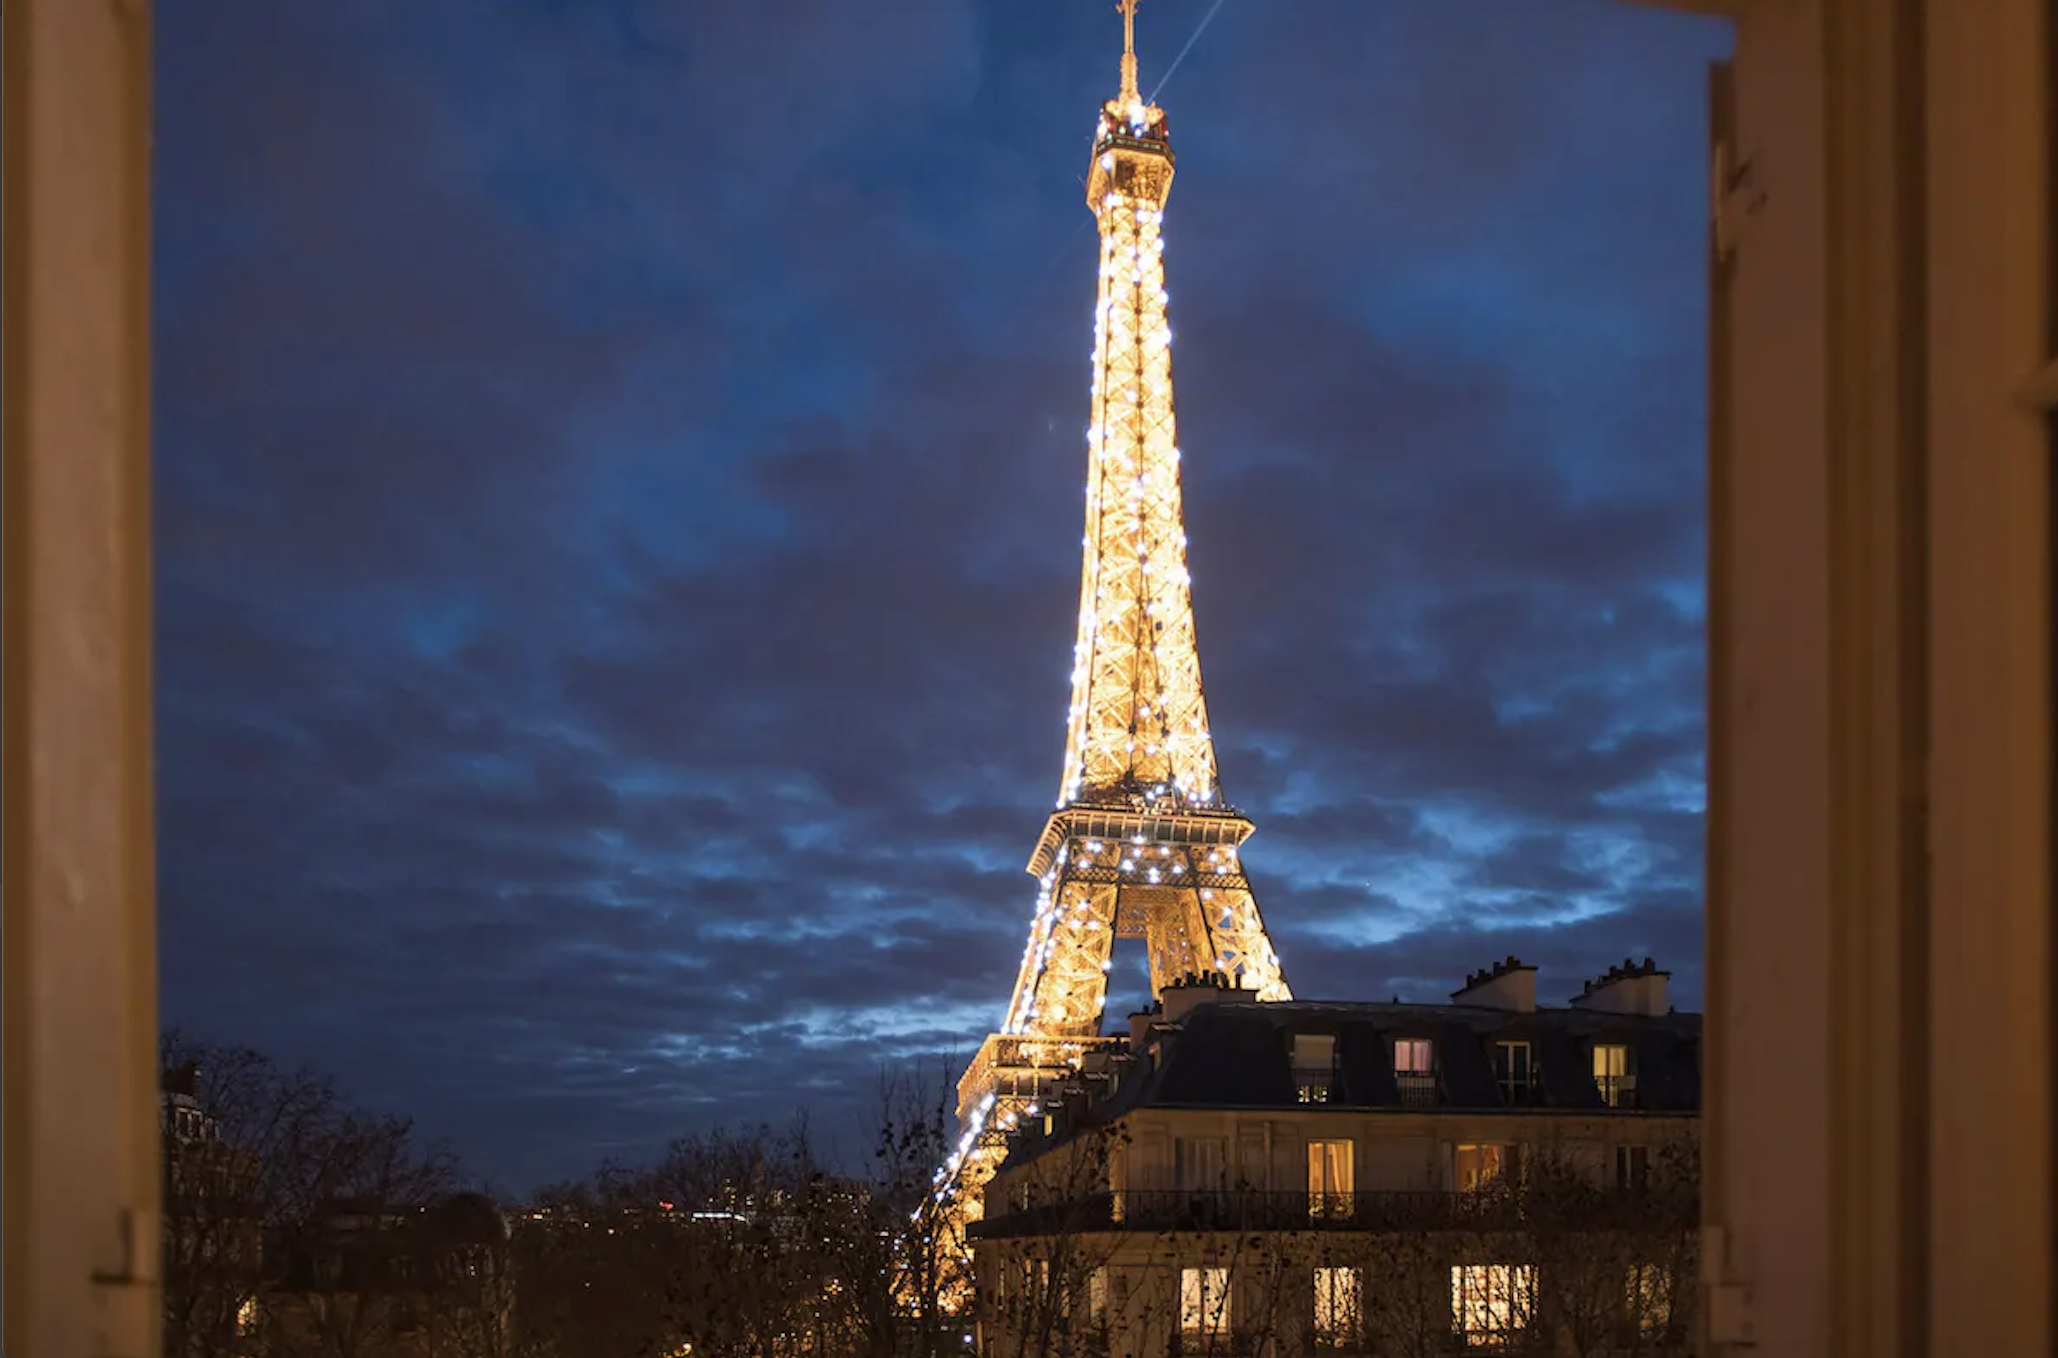 The Bergerac Paris view of the Eiffel Tower sparkling at night